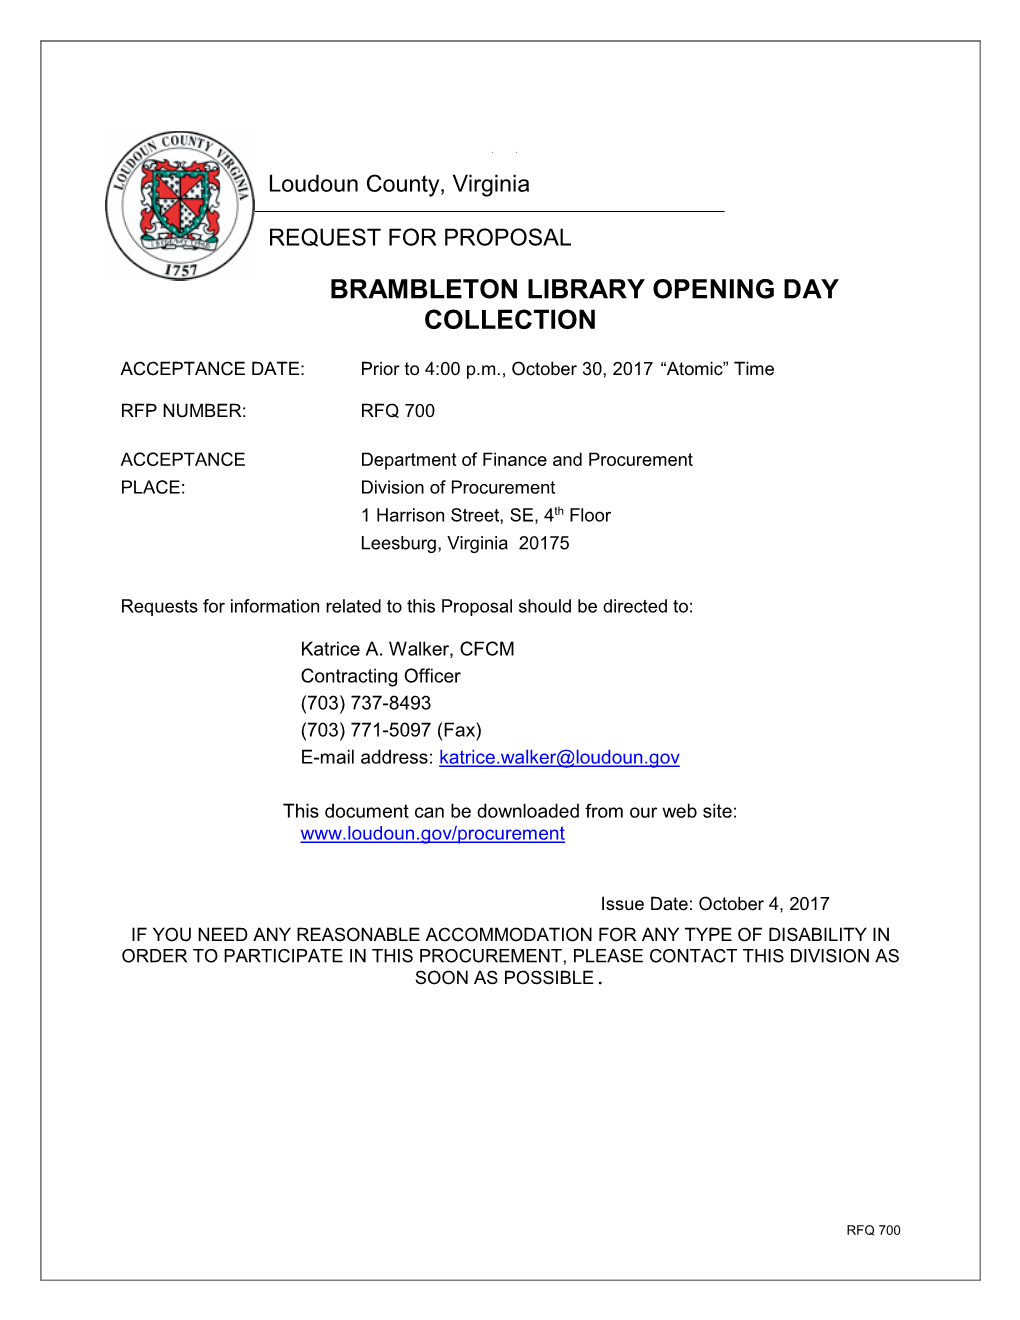 Brambleton Library Opening Day Collection